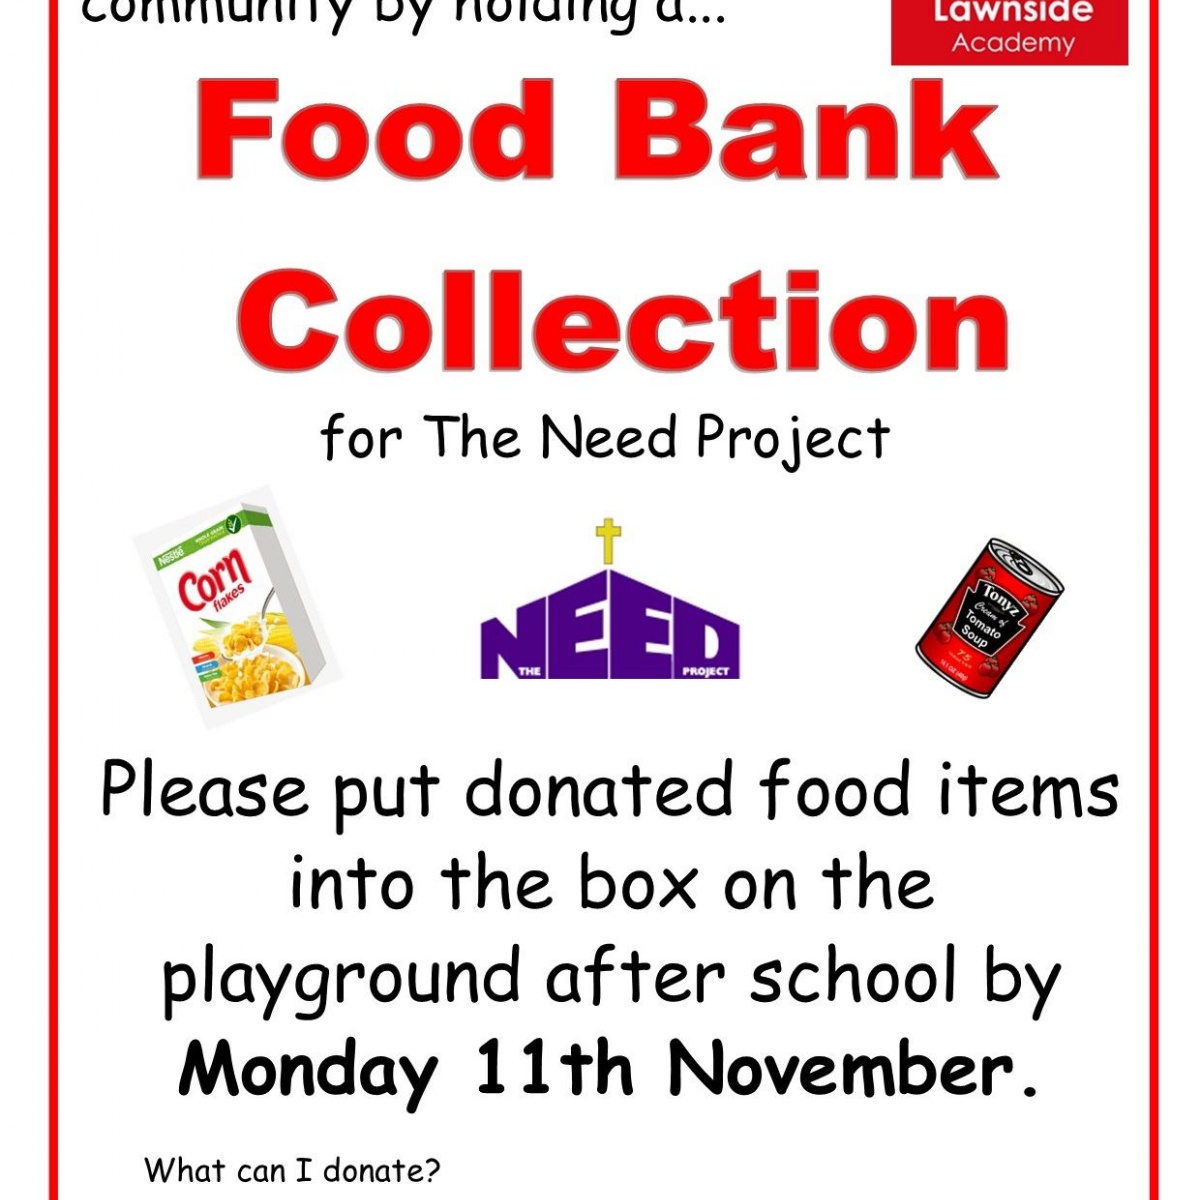 Lawnside Academy - Food Bank Collection